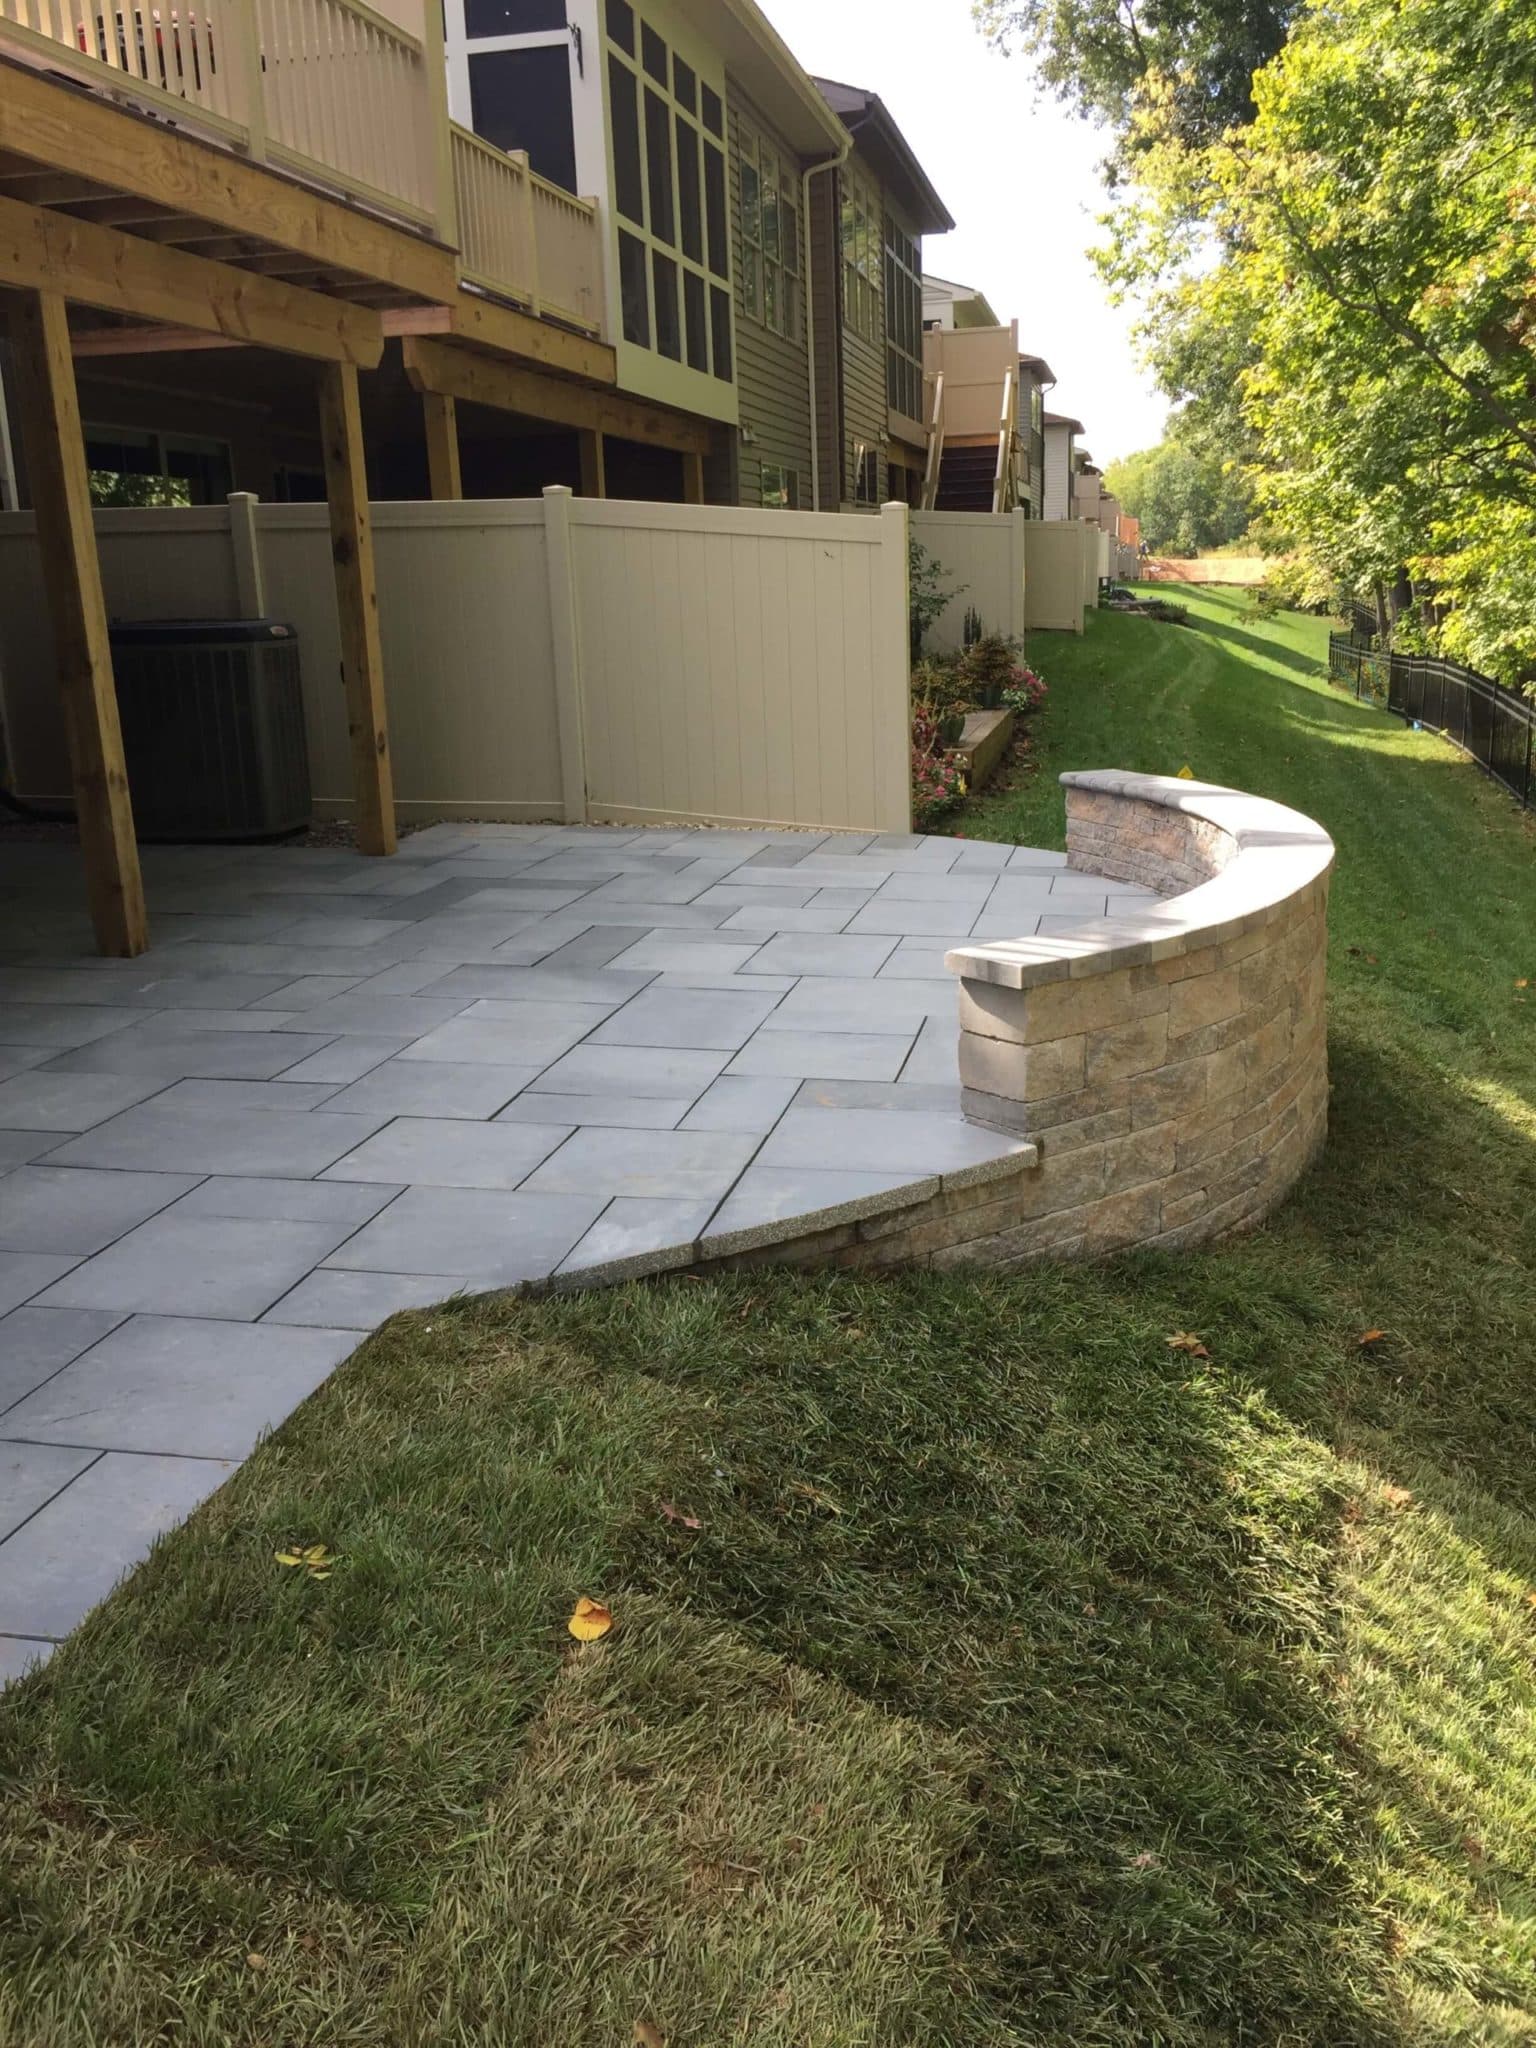 562 Townhouse Patio in Techo-Bloc Aberdeen Azzurro Pavers with Curved Sitting Wall & Retaining Wall